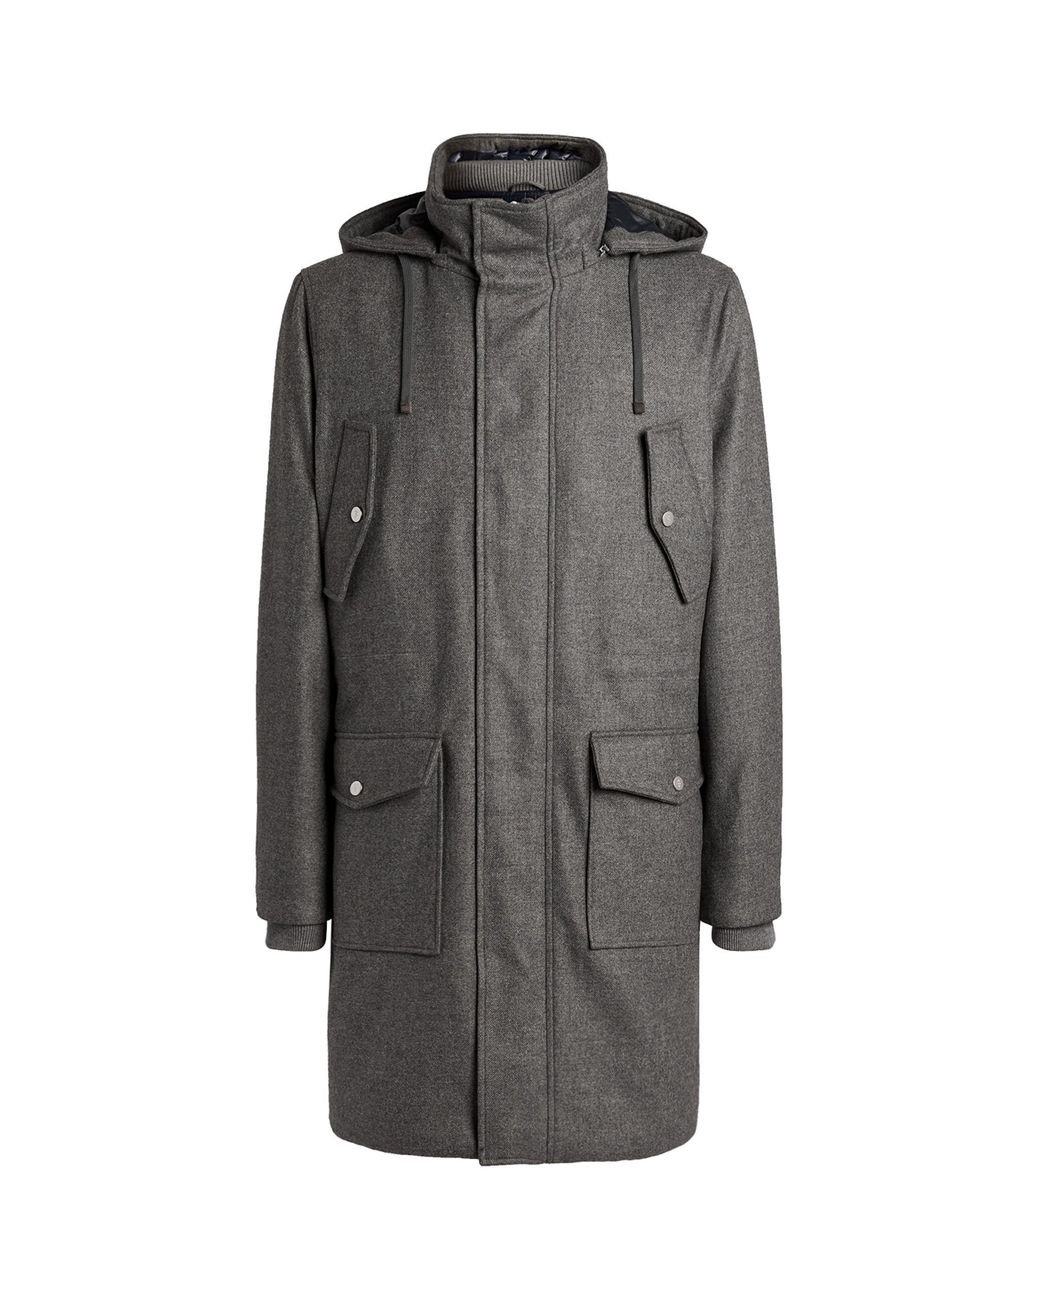 Eleventy Wool Storm System Parka in Gray for Men - Lyst